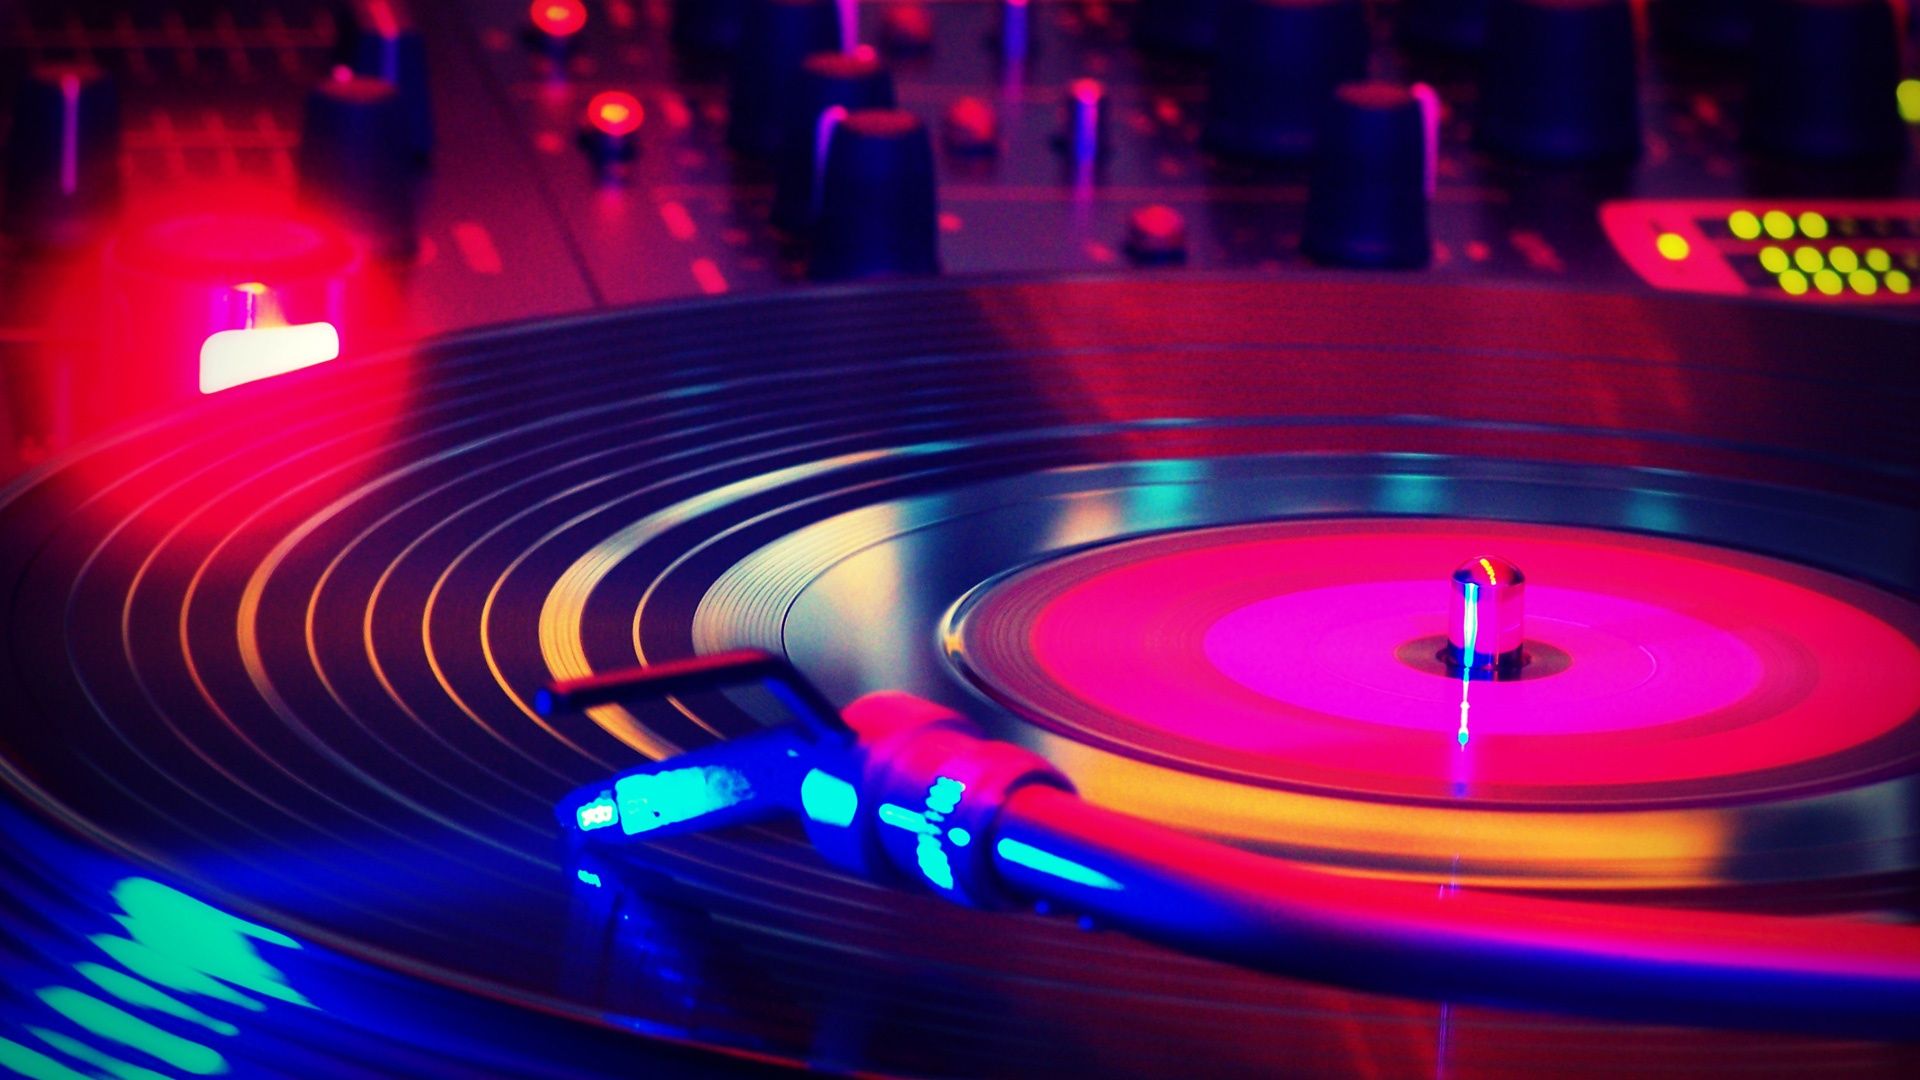 Disco Vinyl Nights Colorful Turntable Record Spinning